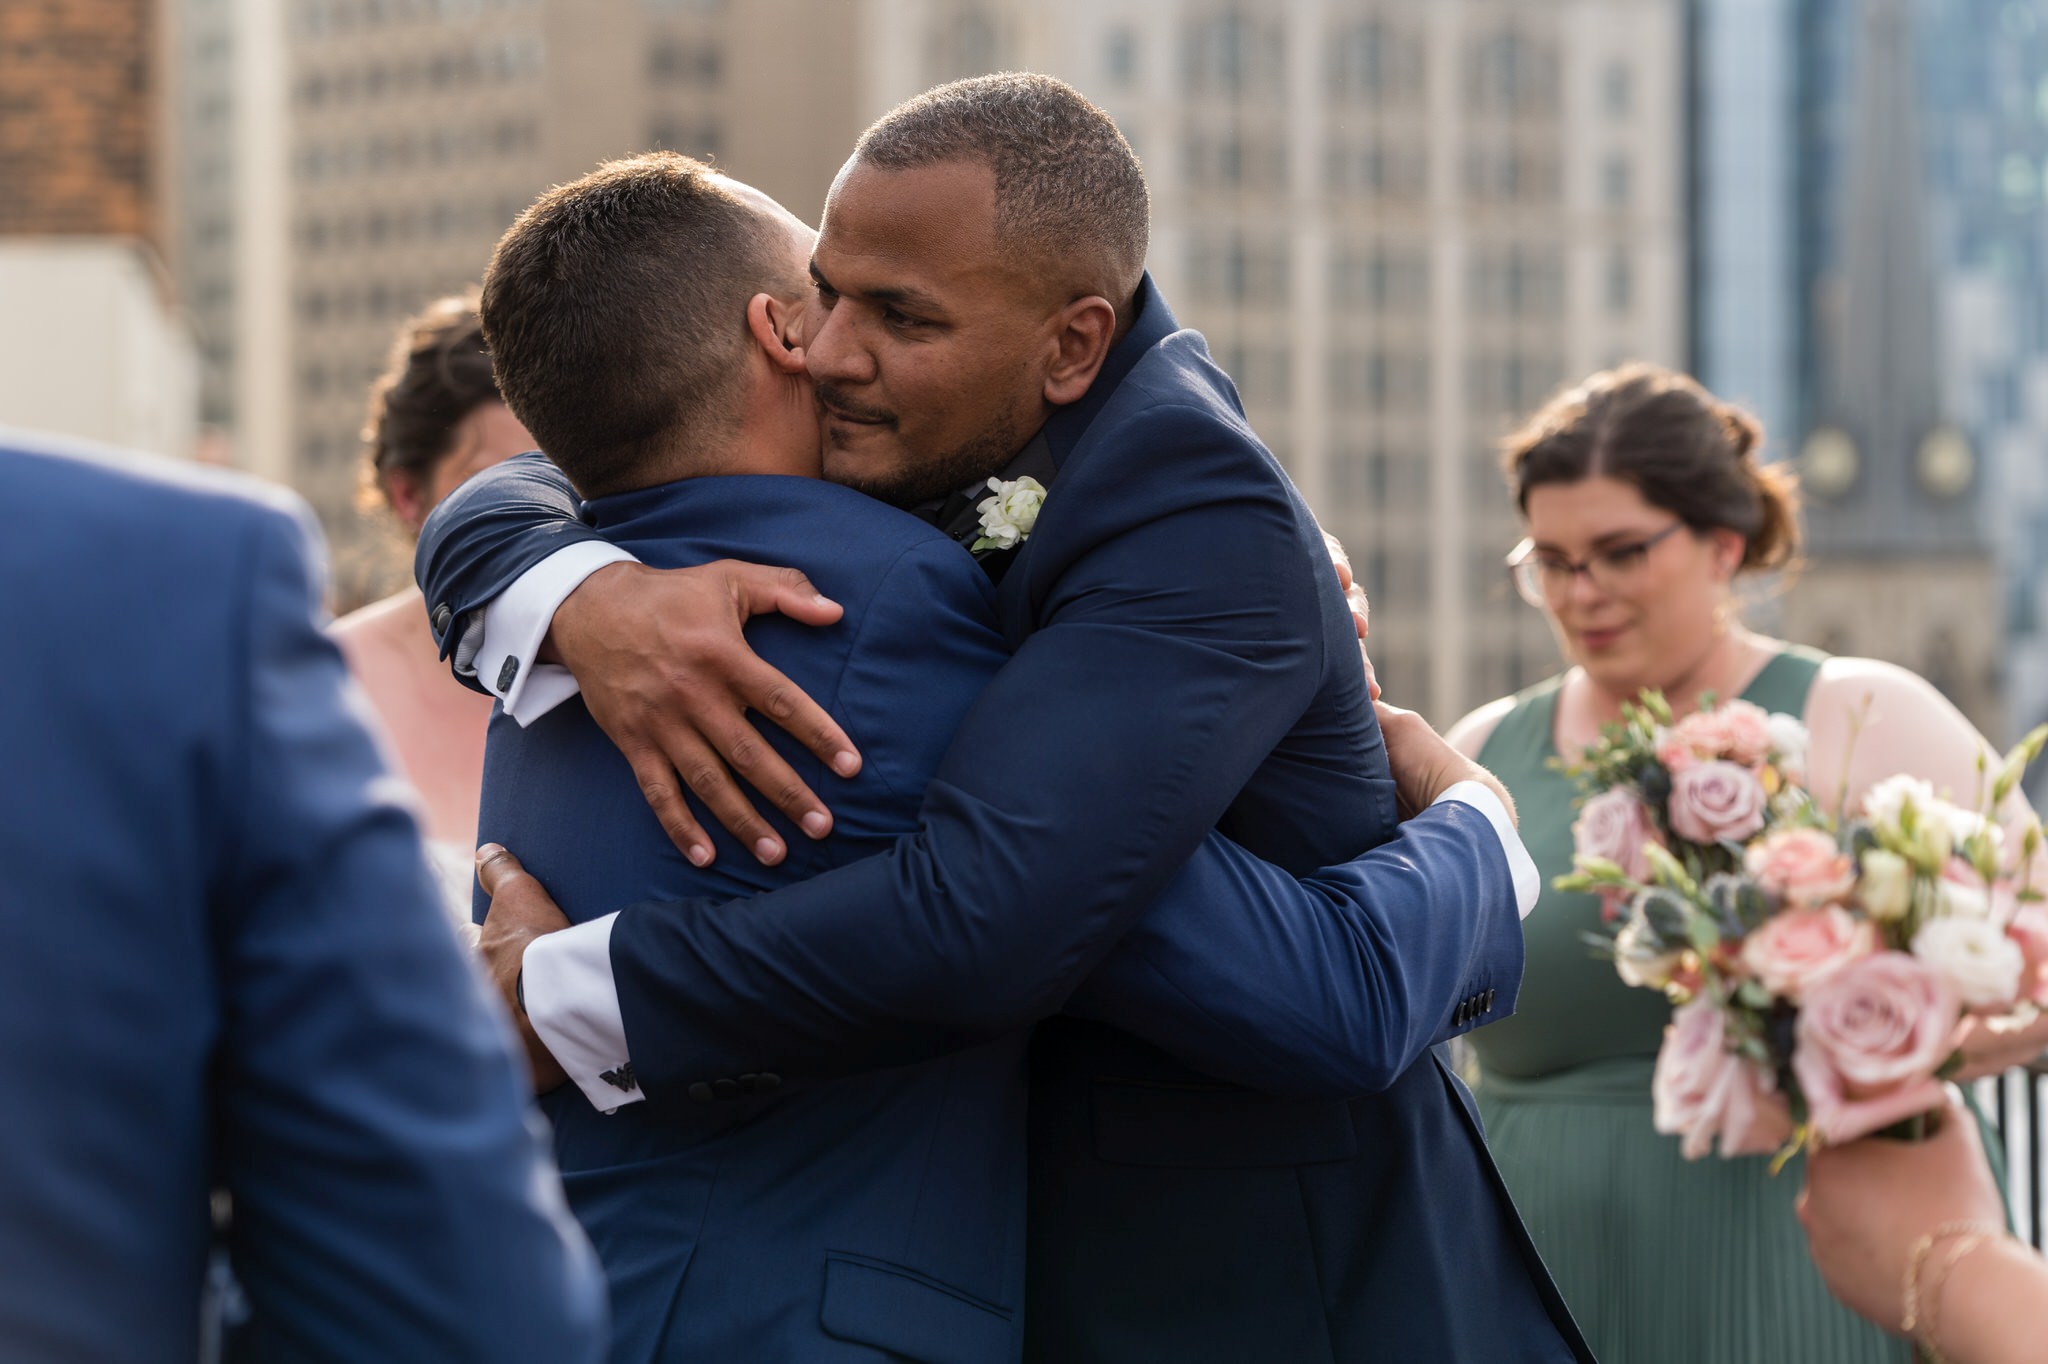 a groom, wearing a blue suit, hugs his groomsman after getting married at their rooftop wedding at the Detroit Opera House